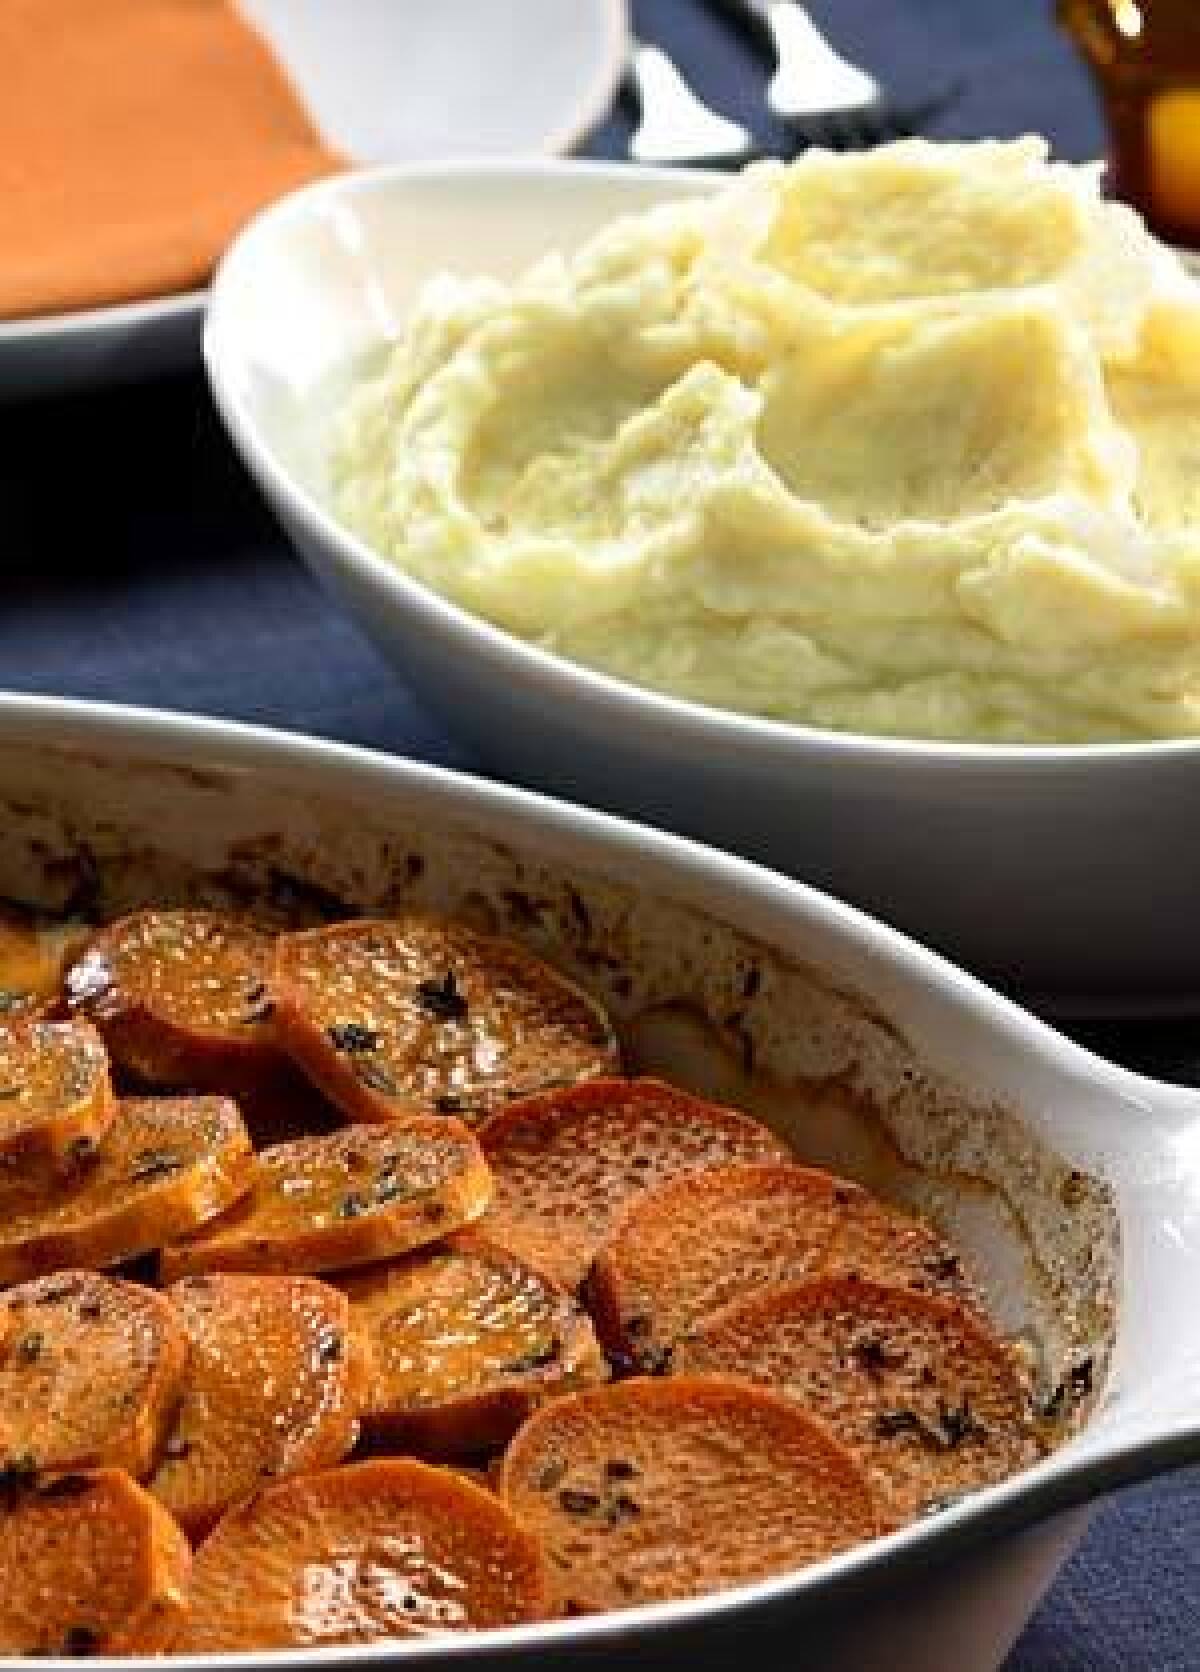 MORE IS MORE: Serve both sweet potato gratin and mashed potatoes this holiday.